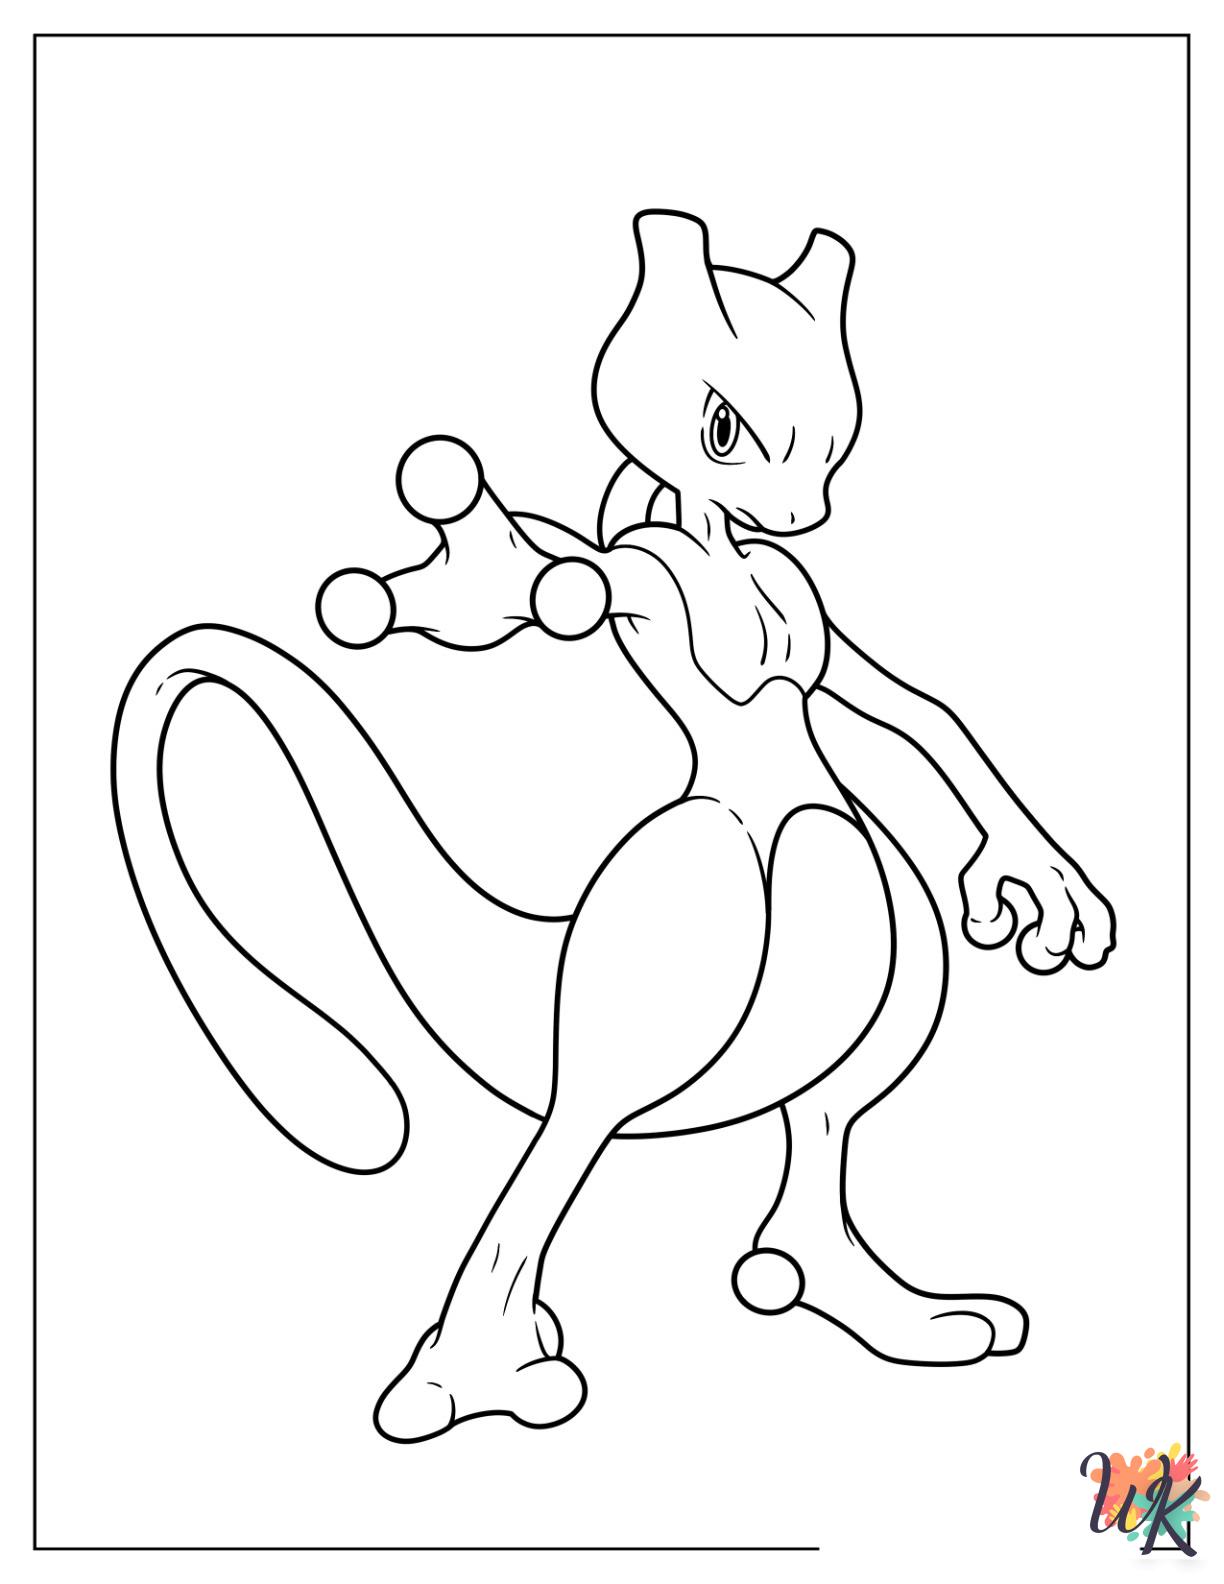 Legendary Pokemon coloring pages printable